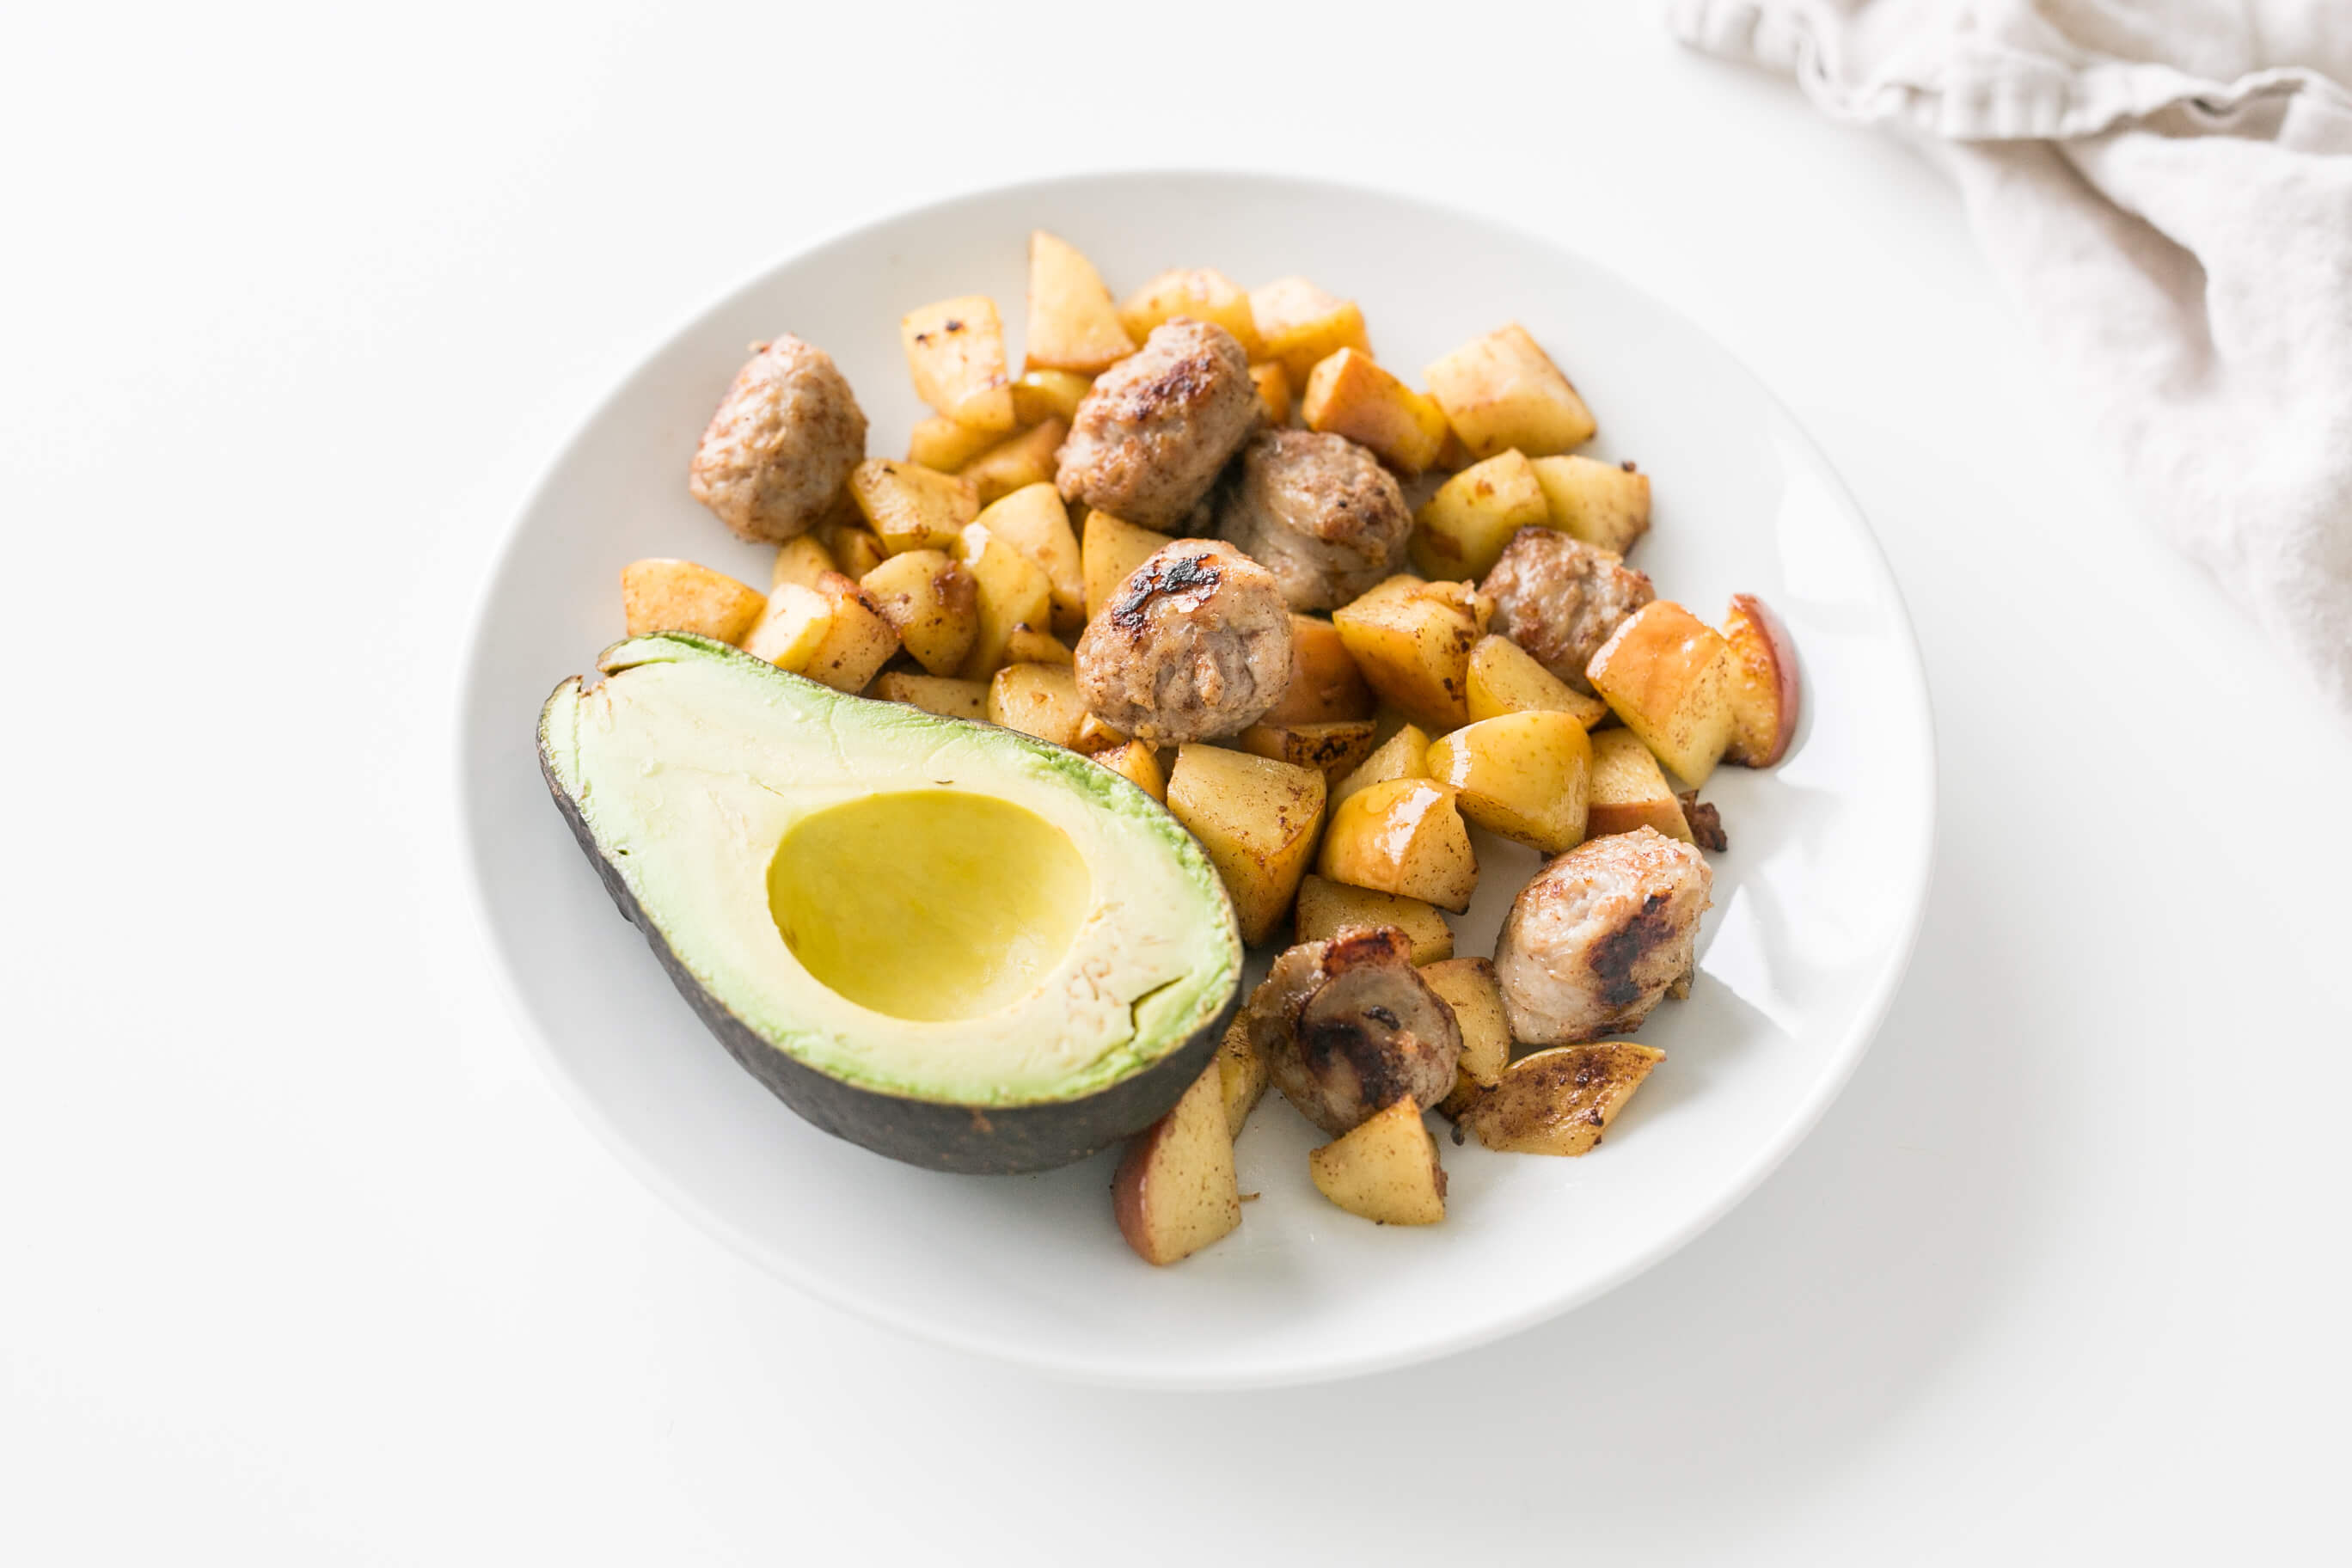 5 Ingredient Meal Ideas Your Clients Will Love: Skillet Sausages & Apples with Avocado